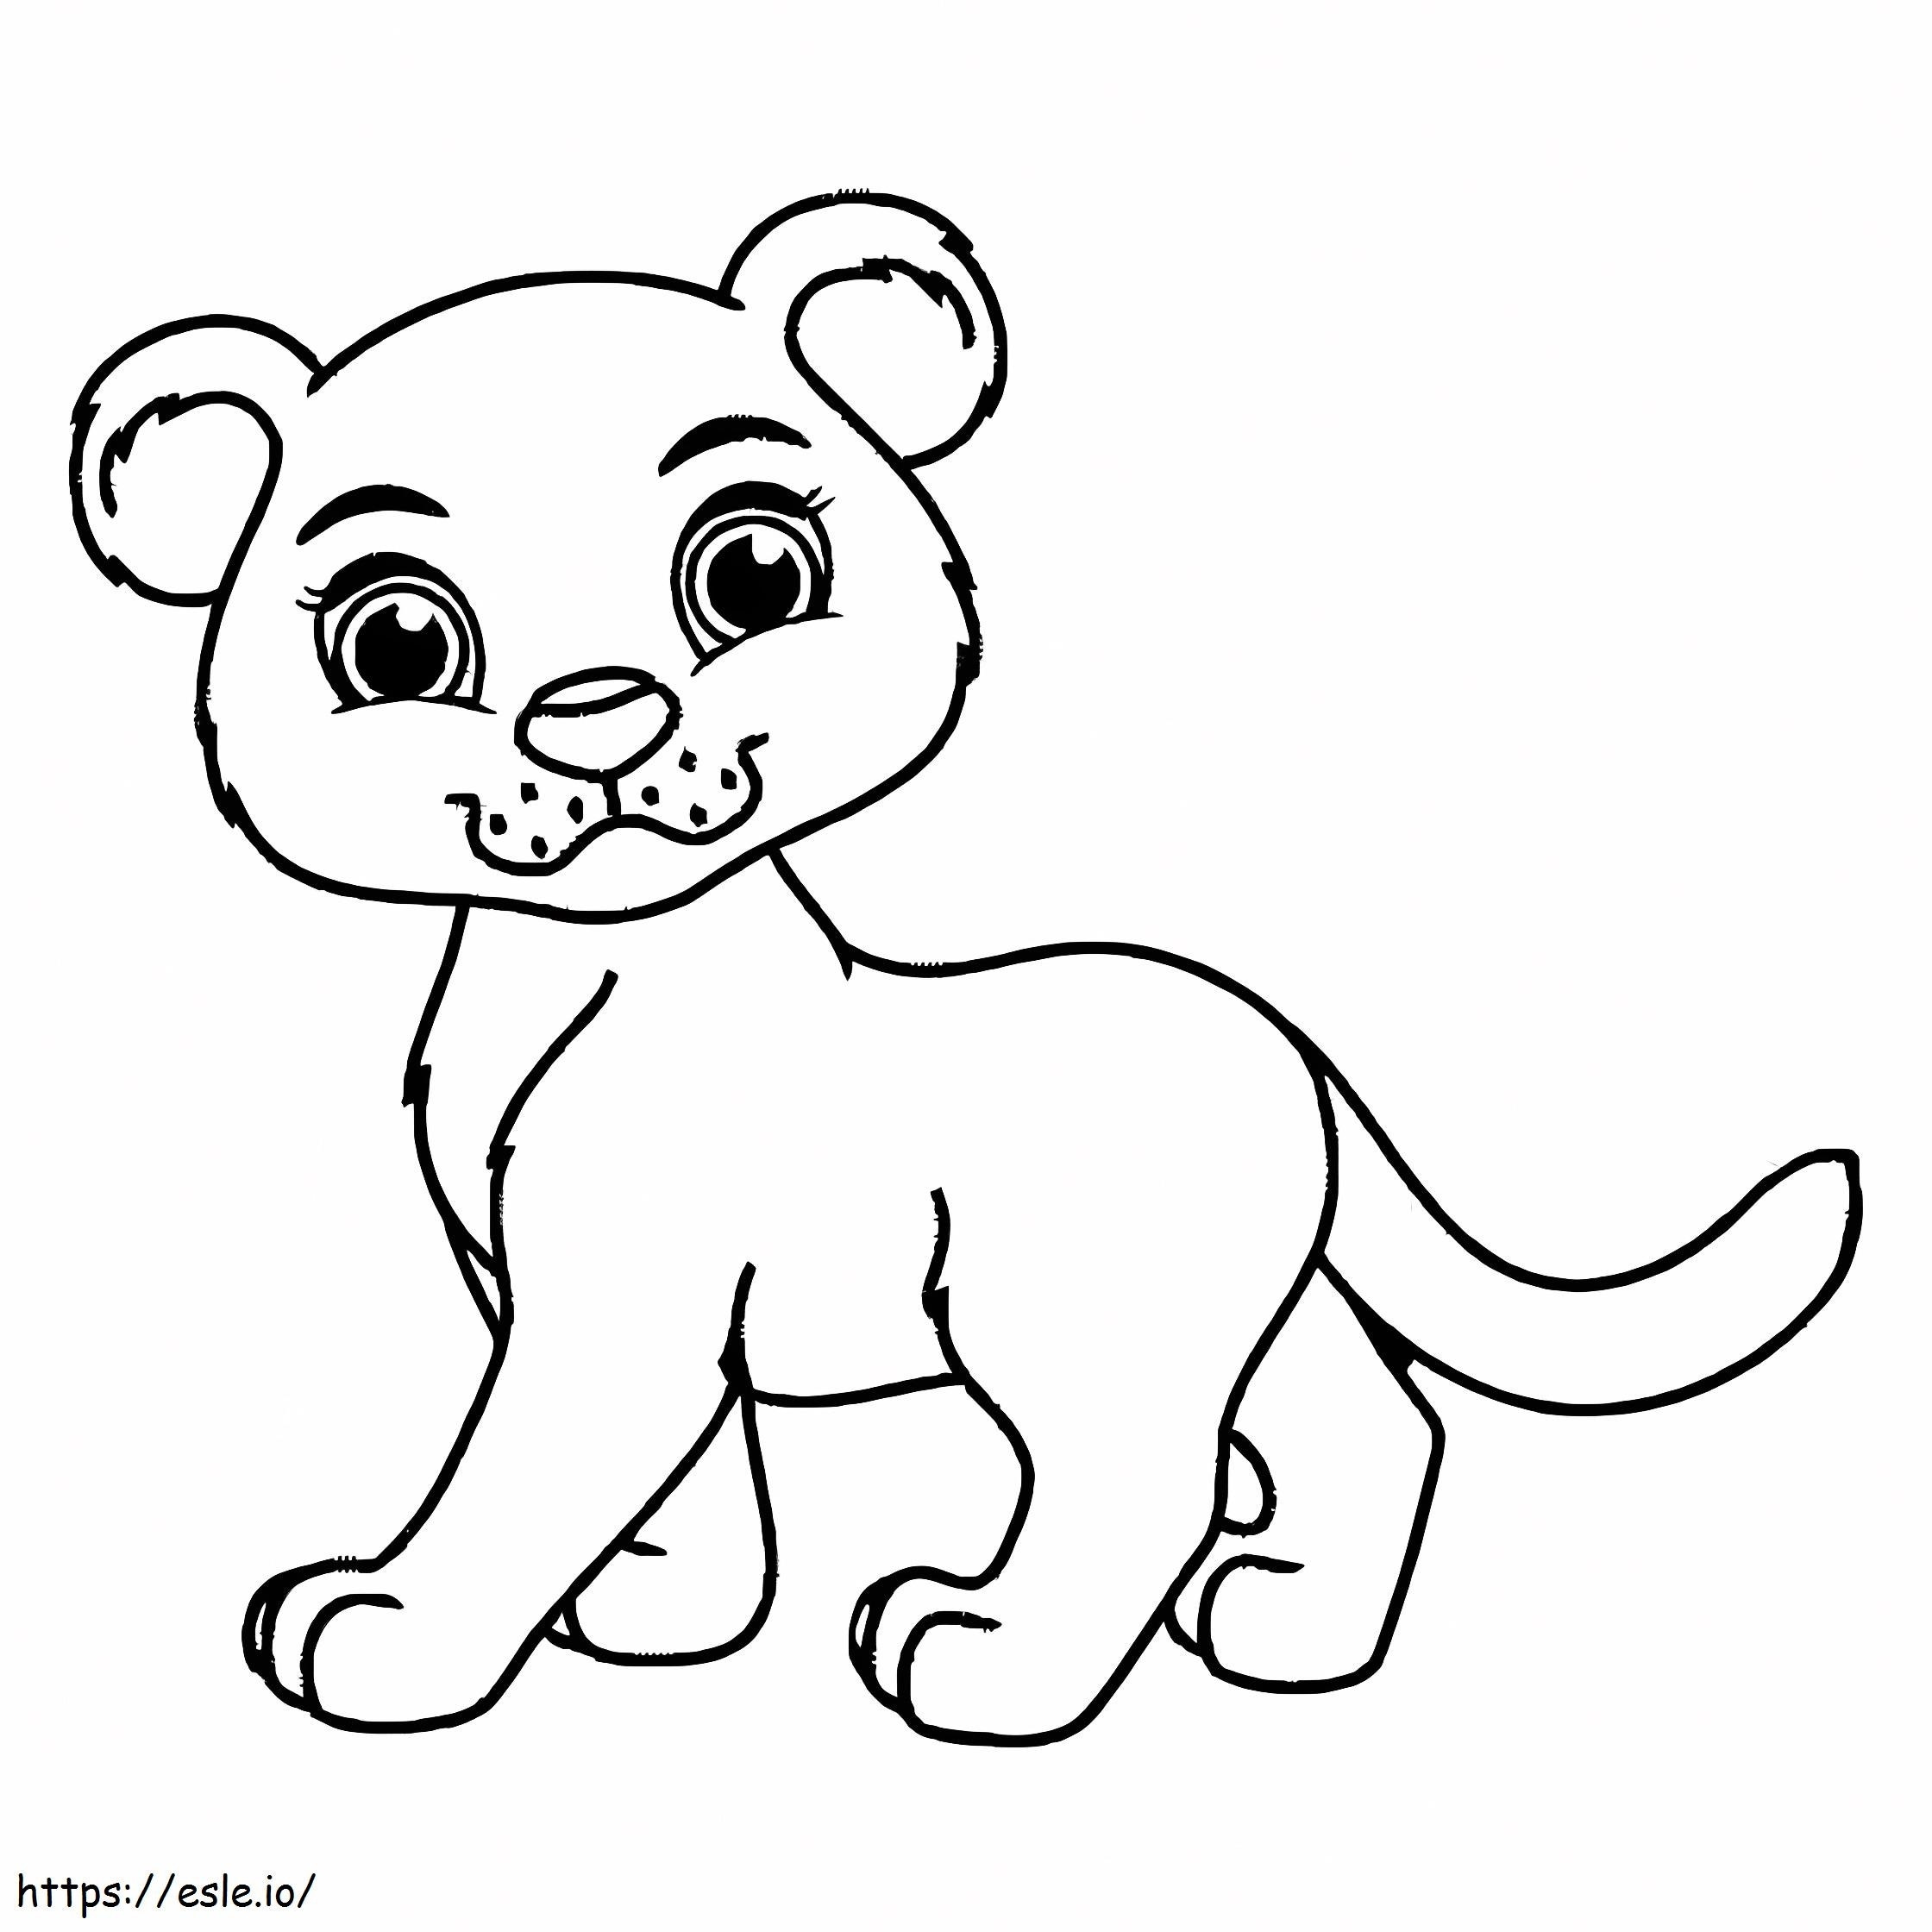 Baby Panther coloring page